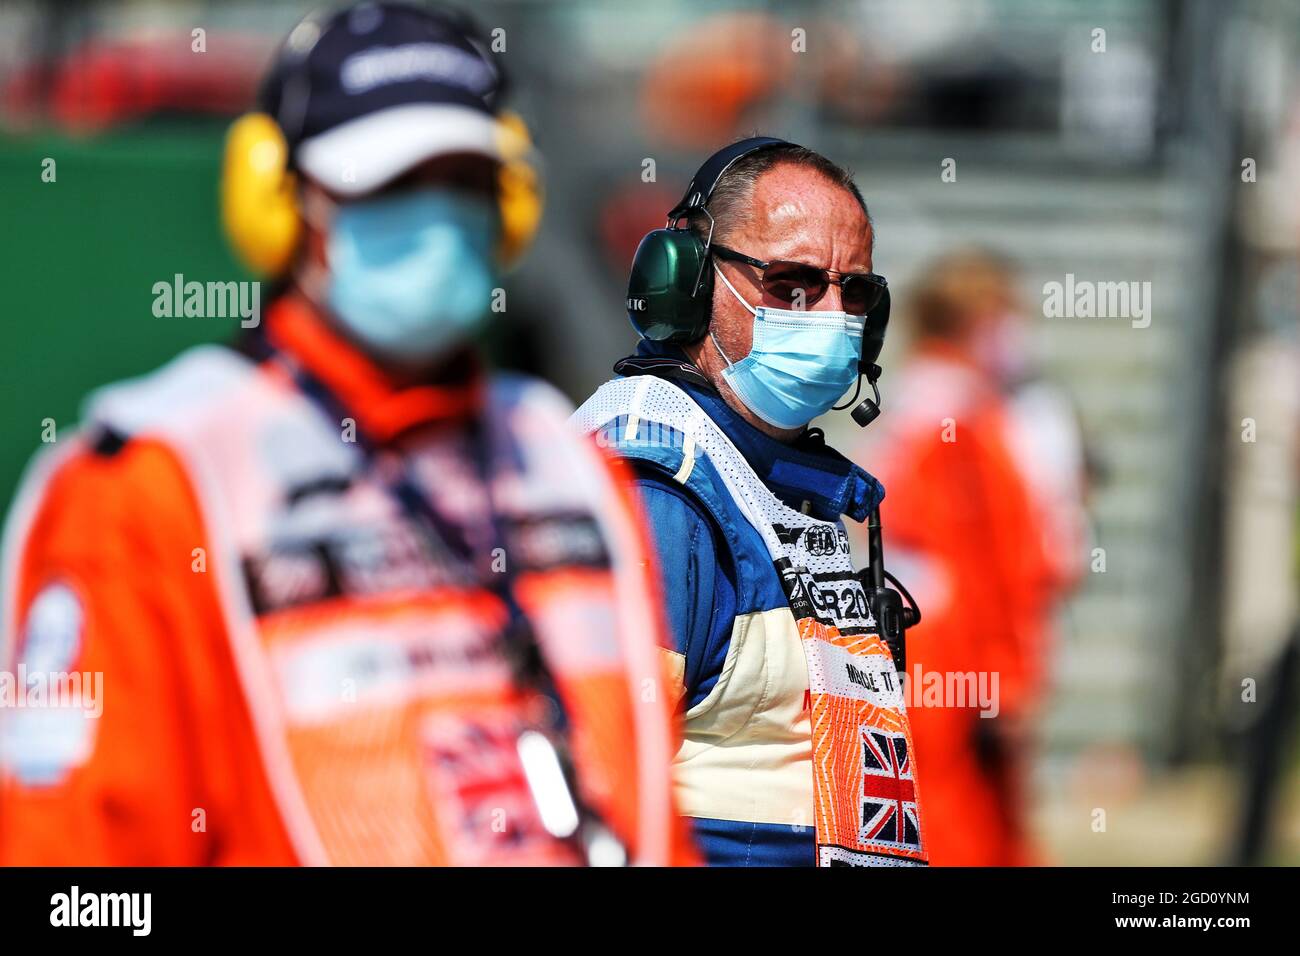 Circuit atmosphere - marshal. 70th Anniversary Grand Prix, Sunday 9th August 2020. Silverstone, England. Stock Photo